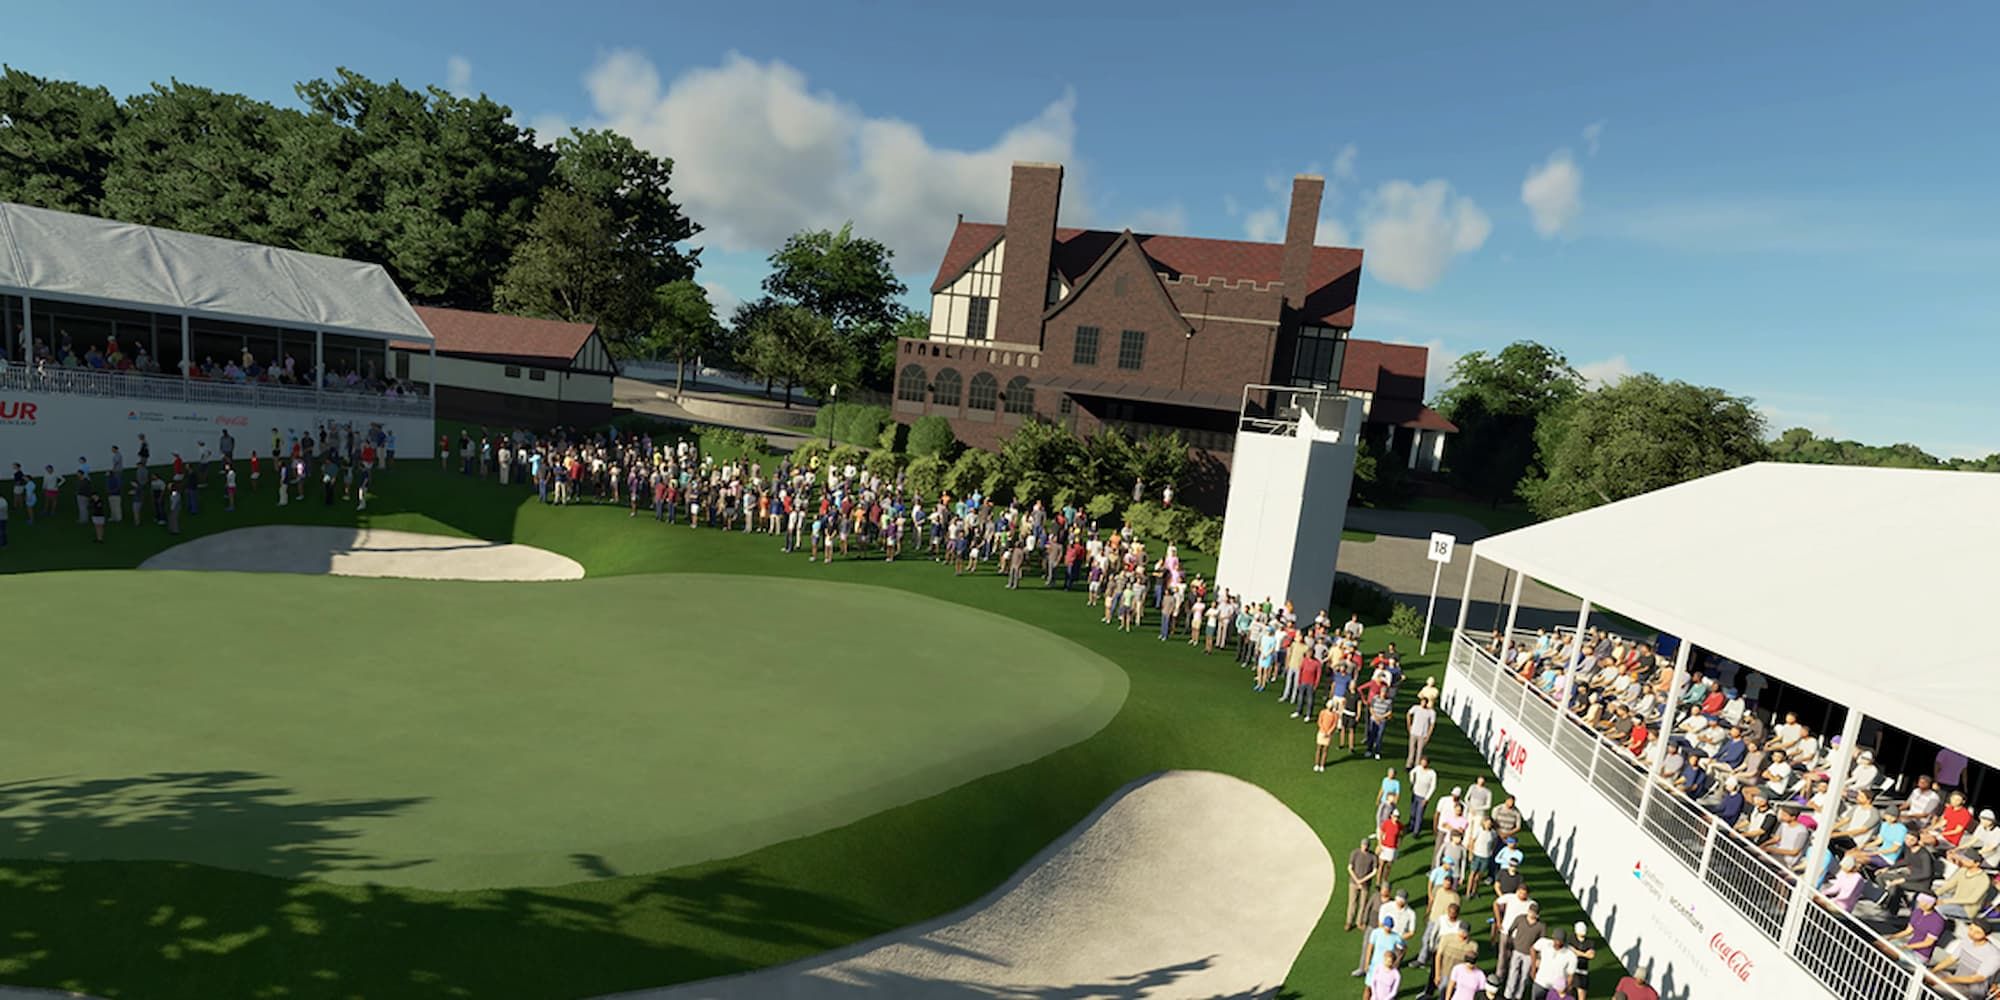 East Lake Golf Club hole 18 is filled with spectators and surrounded by trees and buildings.